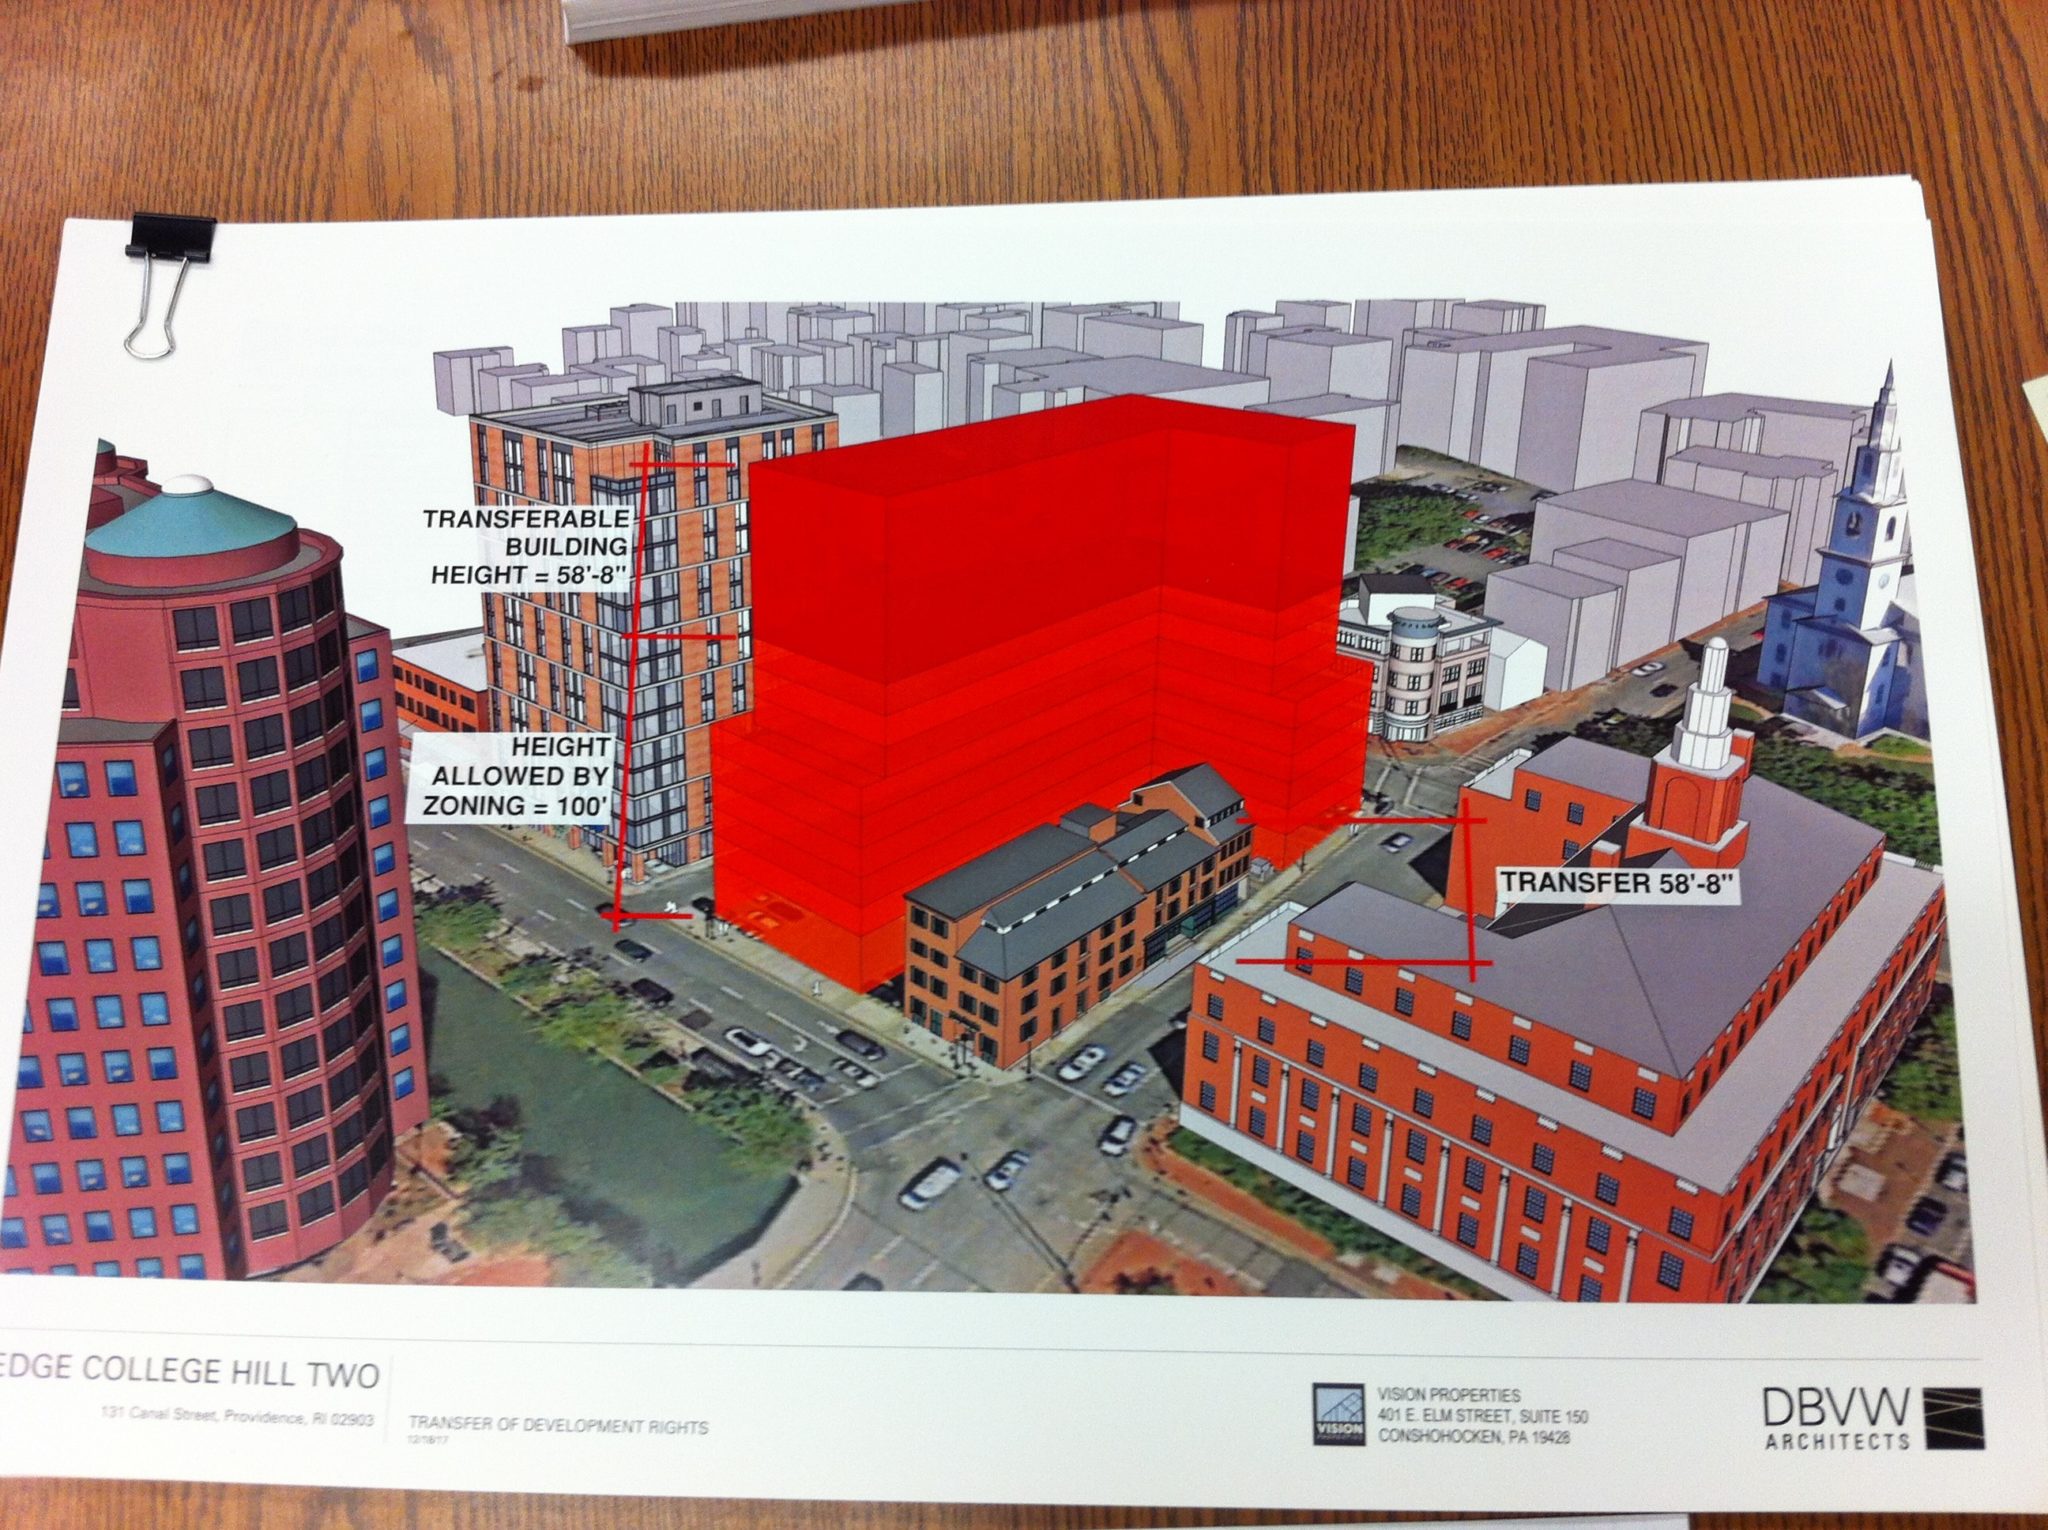 A PHOTO OF a rendering by DBVW Architects, the proposed building is shown in red. The building to its left is the Edge College Hill building now under construction. The historical building on the site is at right. /PBN FILE PHOTO/MARY MACDONALD